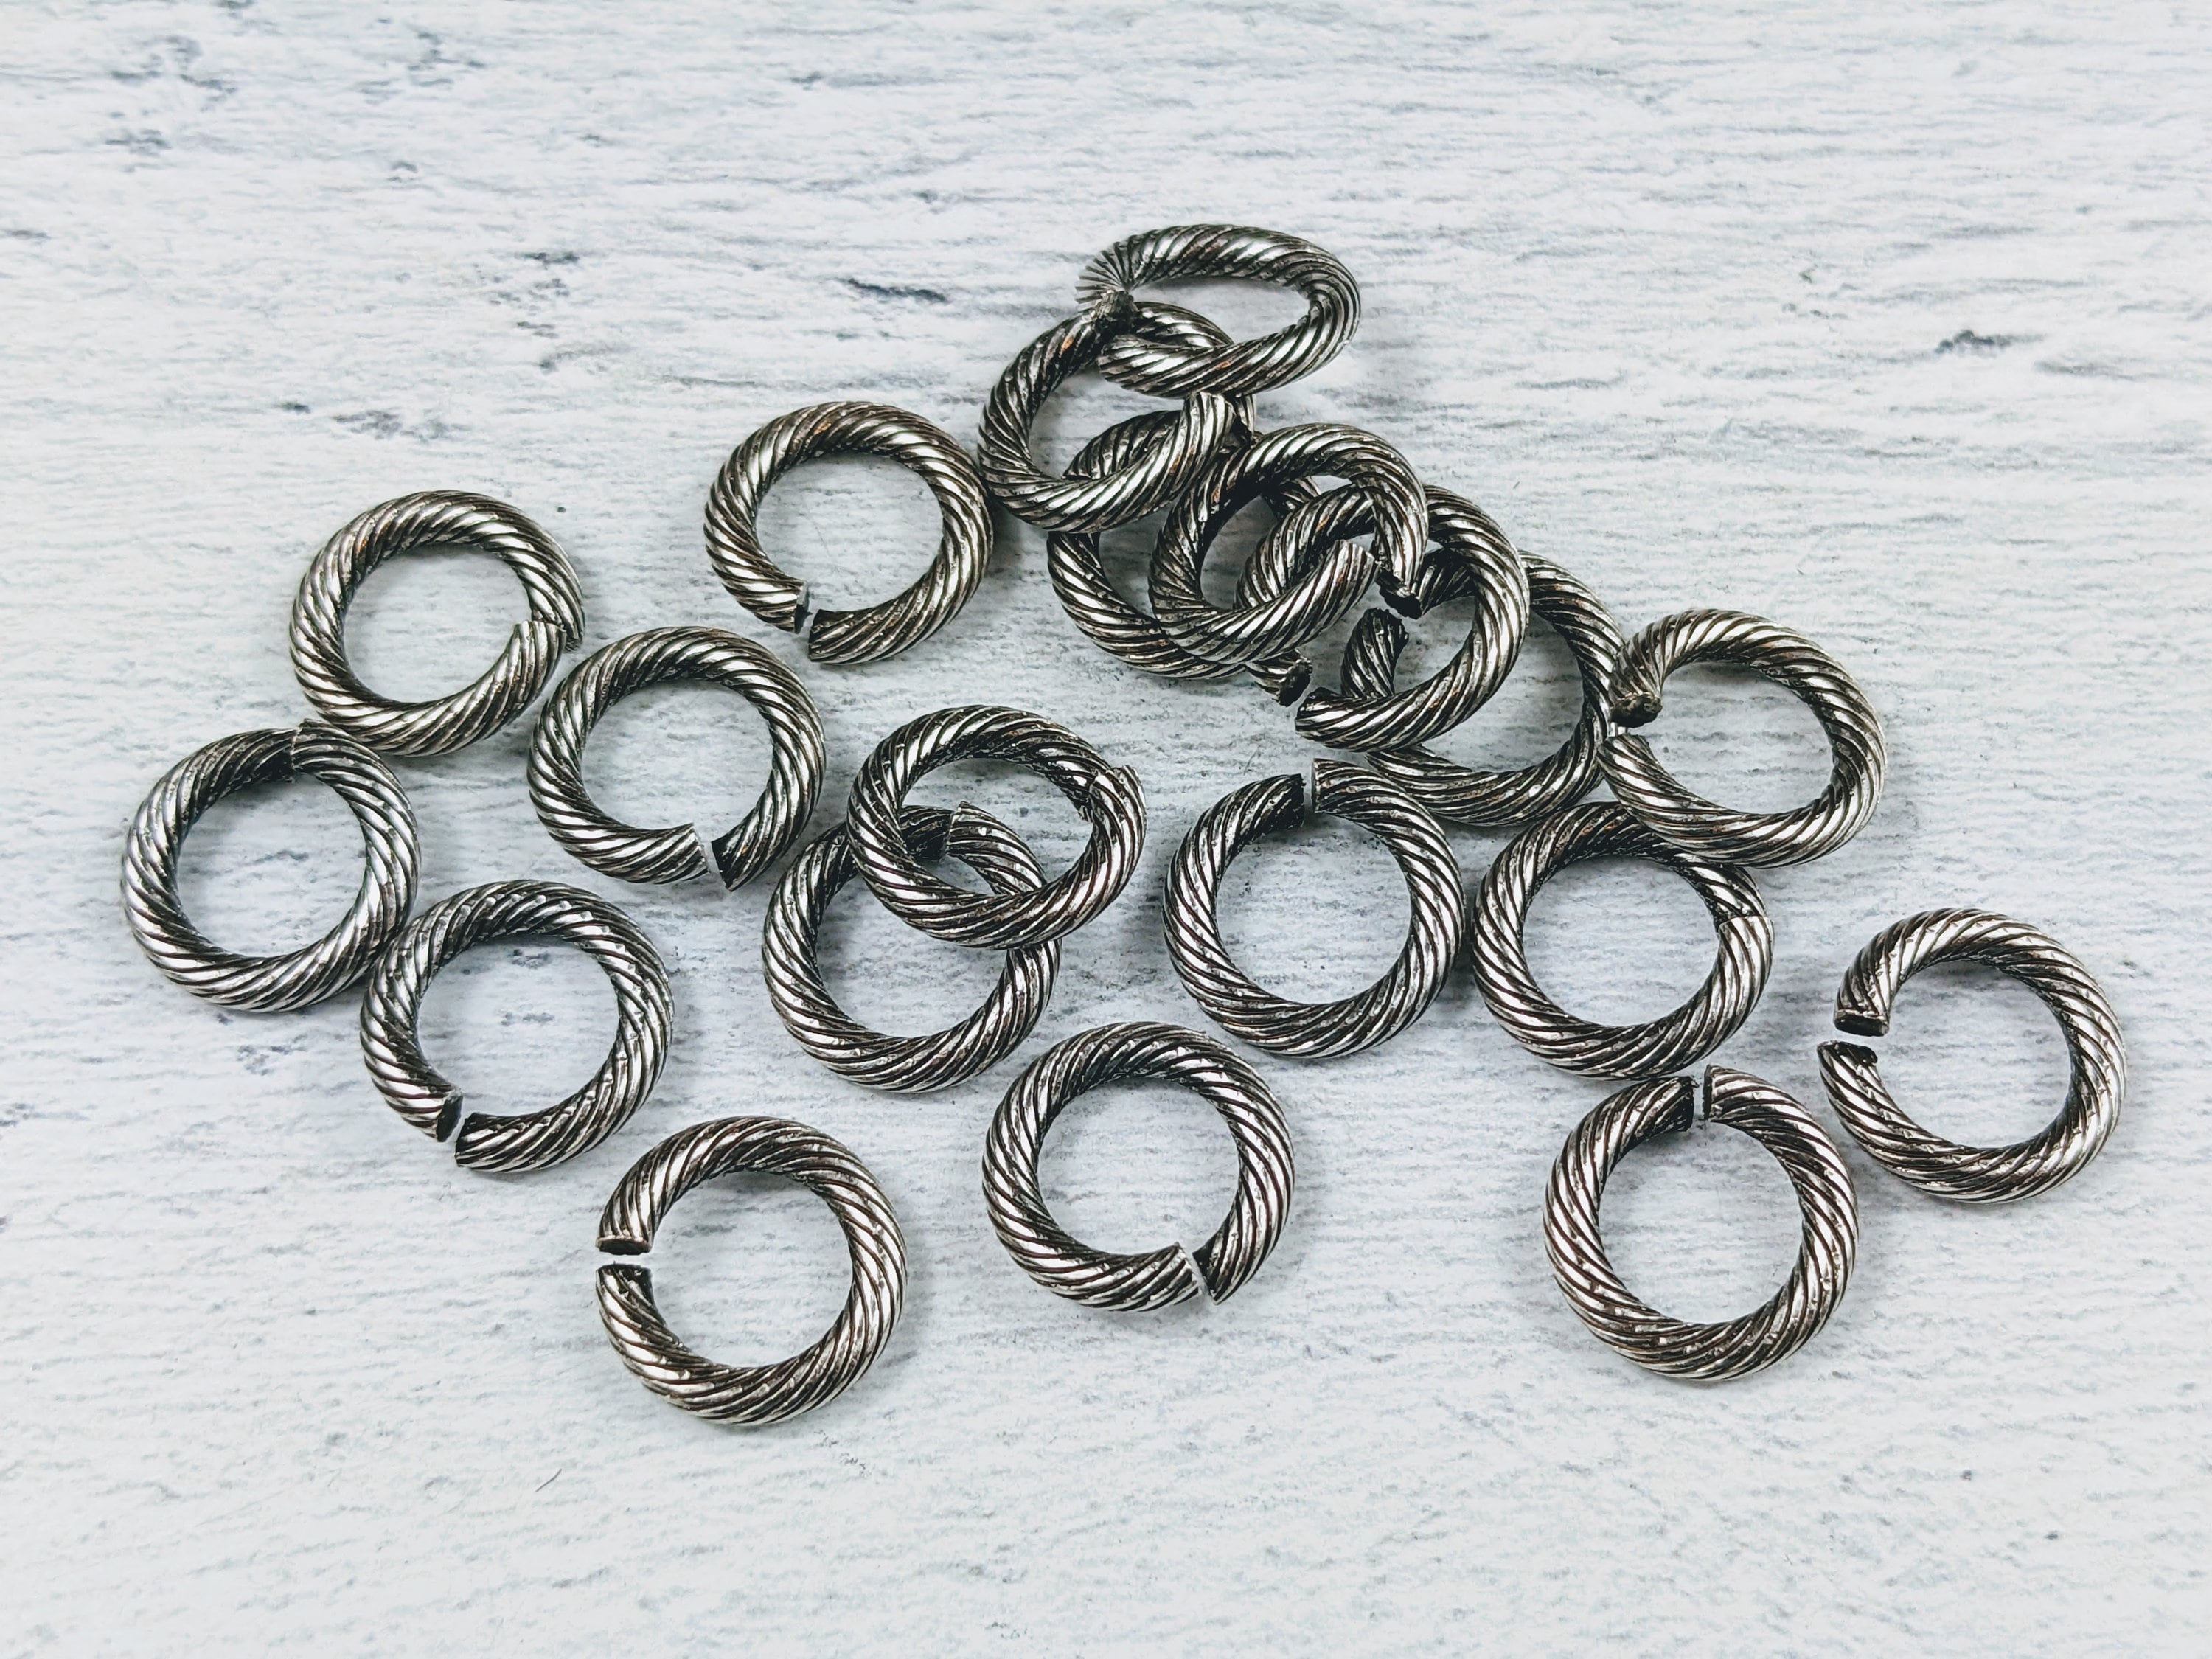 Jump Rings Burnished Silver, 4mm, 6mm, 8mm, 10mm, or 12mm, PK of 10, Brass  Jump Rings, OPEN Ring, Heavy 15 GA (1.8mm) Jump Rings, Fast Ship